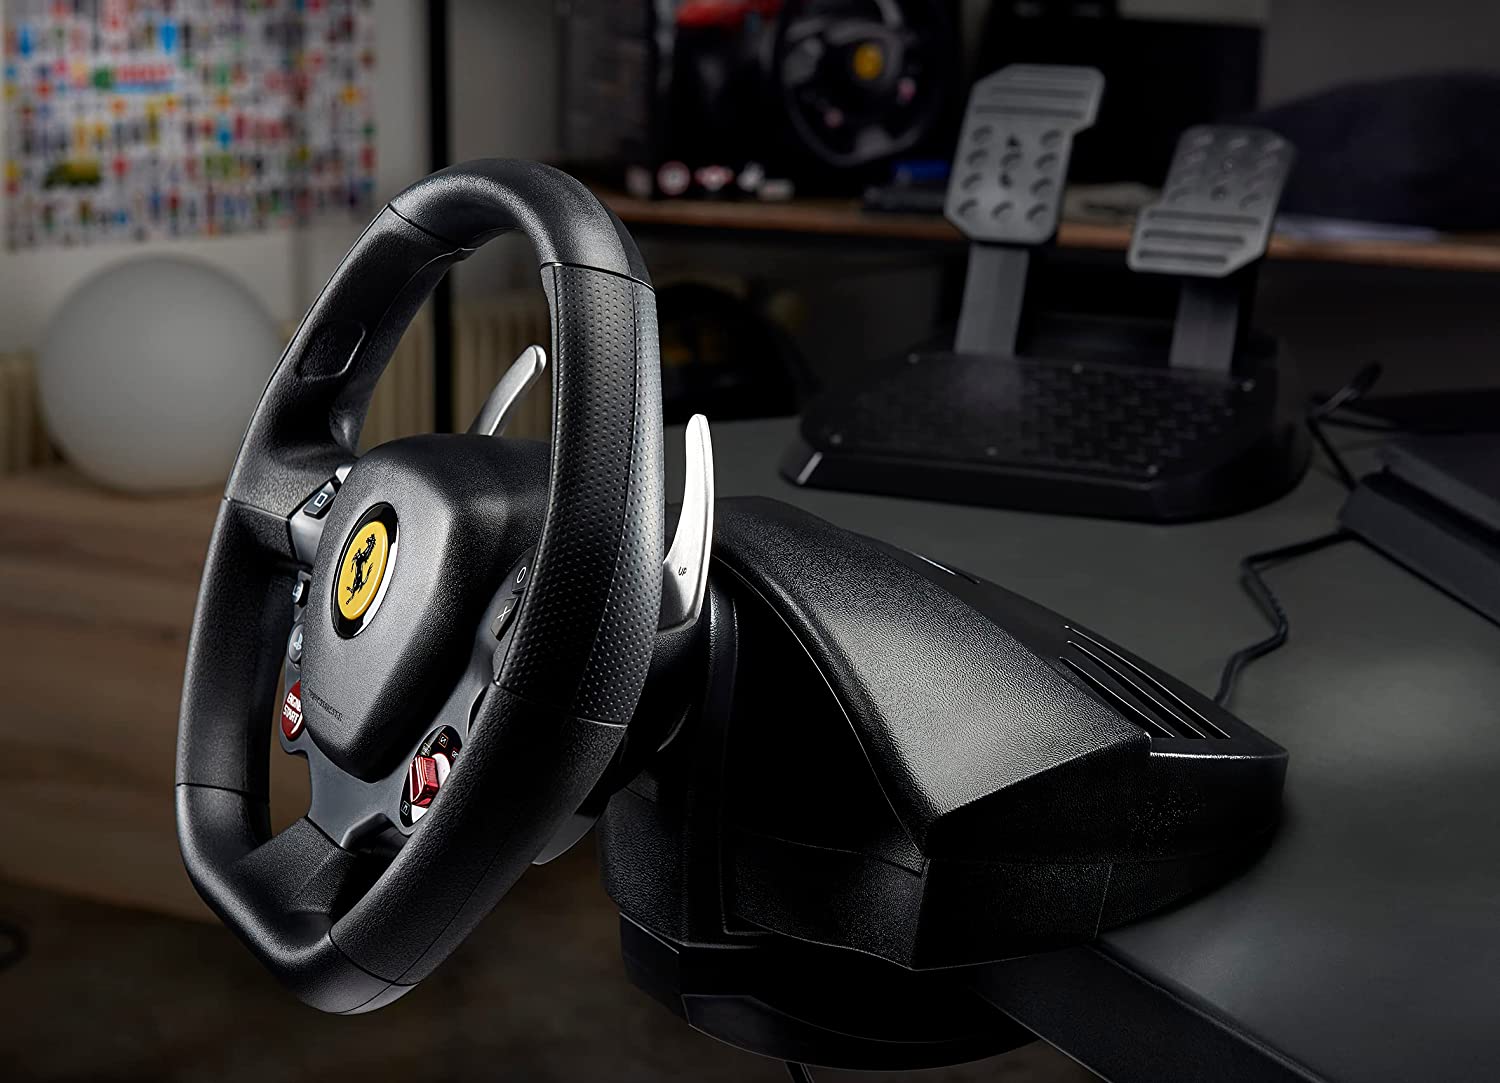 Thrustmaster - T80 Ferrari 488 GTB Edition Racing Wheel for PlayStation 5, 4 and Windows - Black With Cleaning Manual Kit Bolt Axtion Bundle Used - image 5 of 5